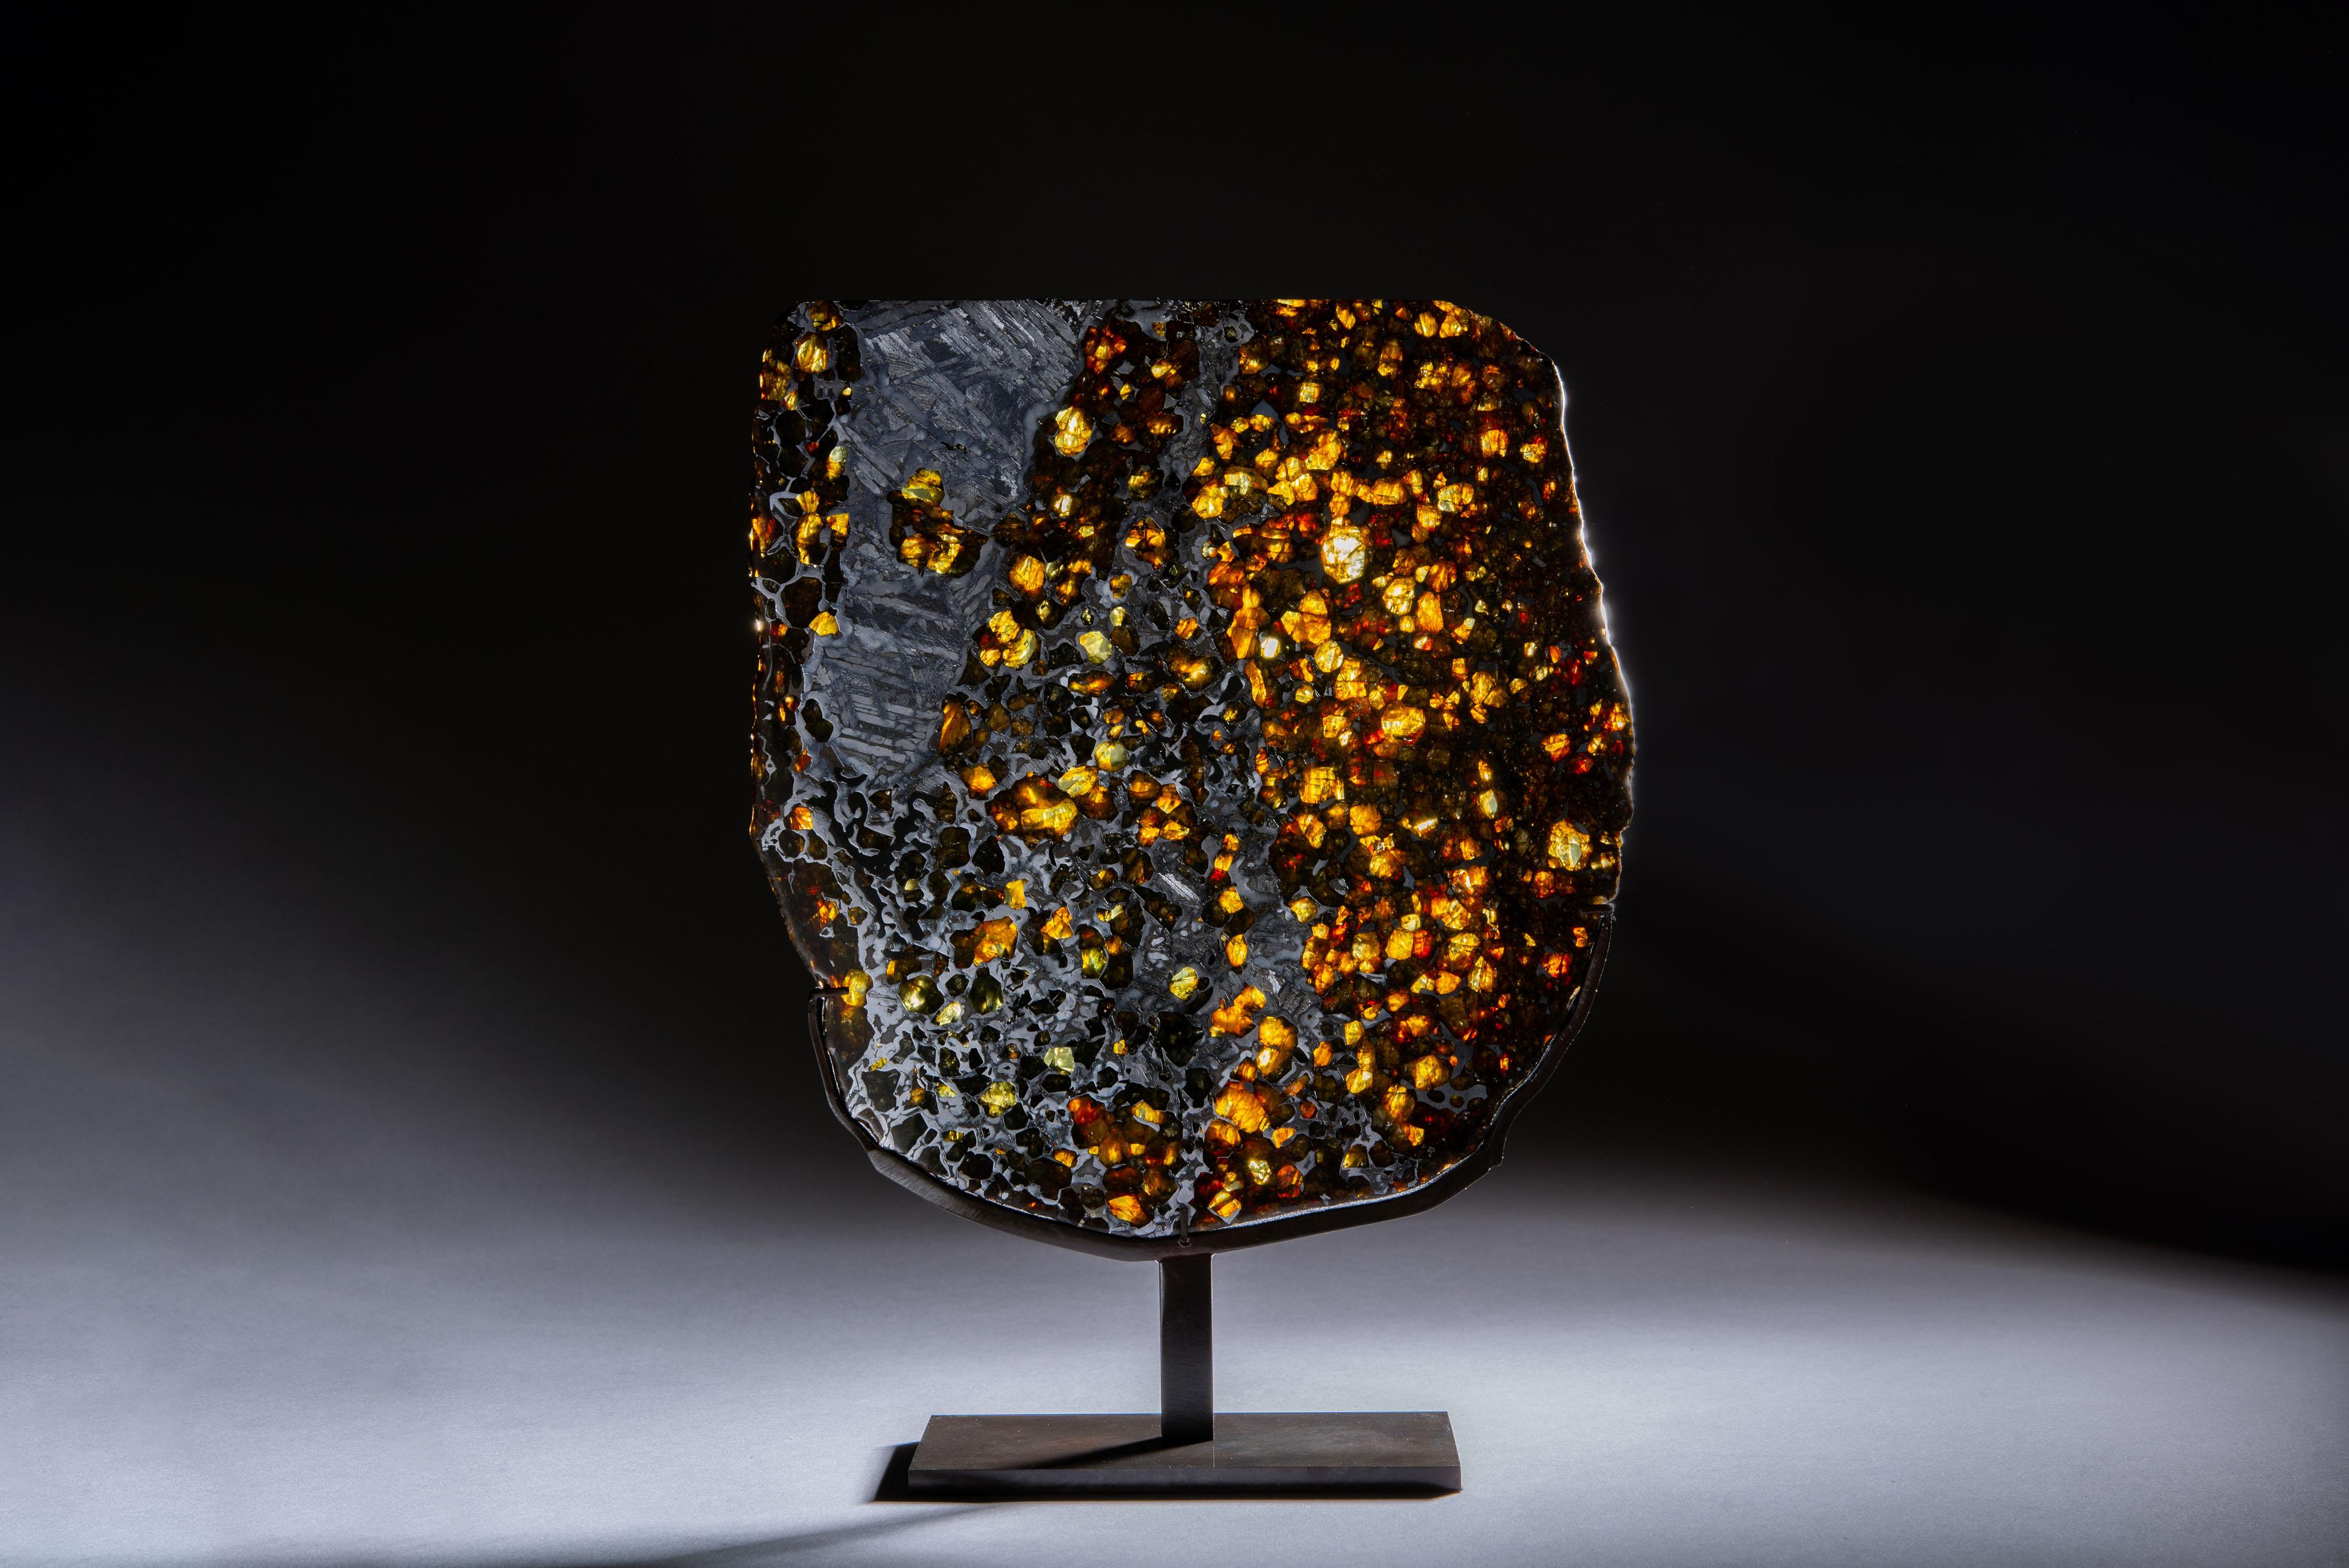 A cross section cut from an extremely rare pallasite Meteorite, recovered from the Hekandue river bed, Seymchan, Far East Russia.

Created during the formation of our solar system, some 4.55 billion years ago, pallasites are the most beautiful